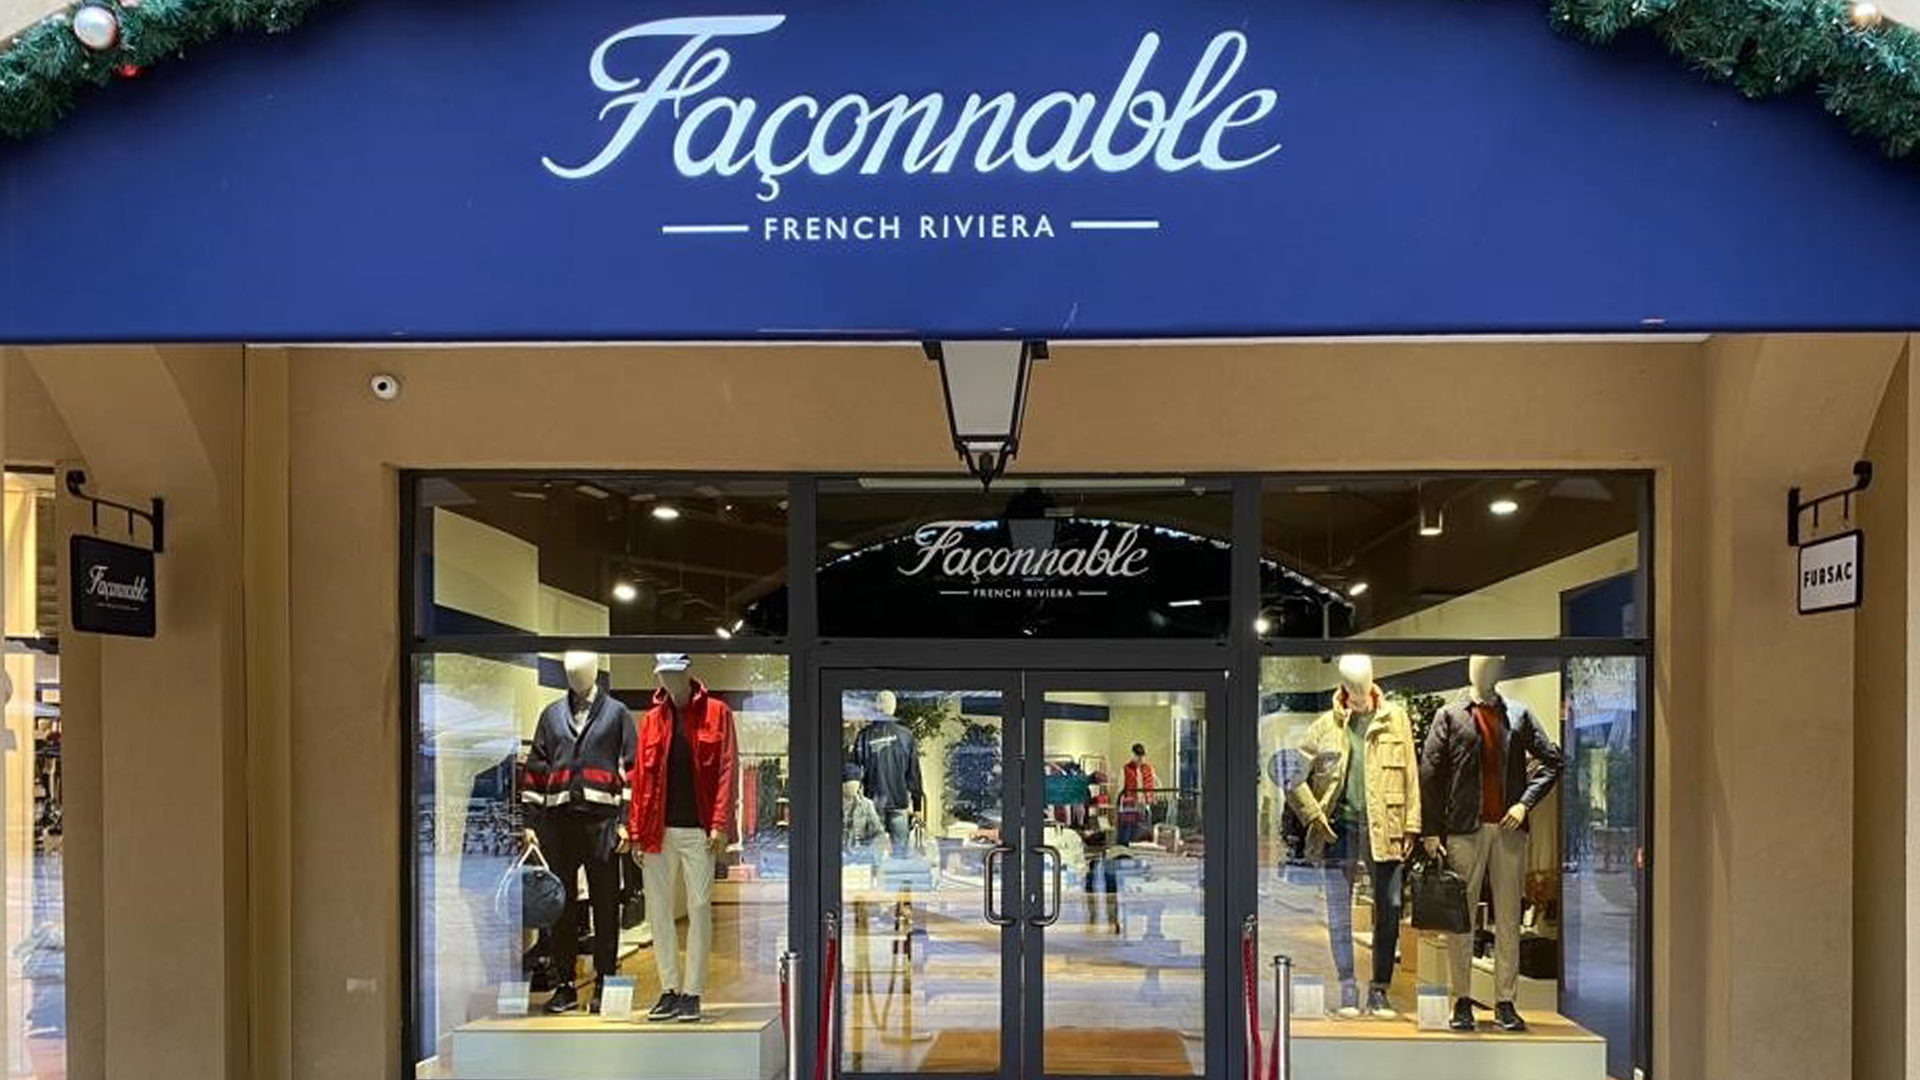 Façonnable has entrusted Grup Idea with the implementation of its retail premises in France